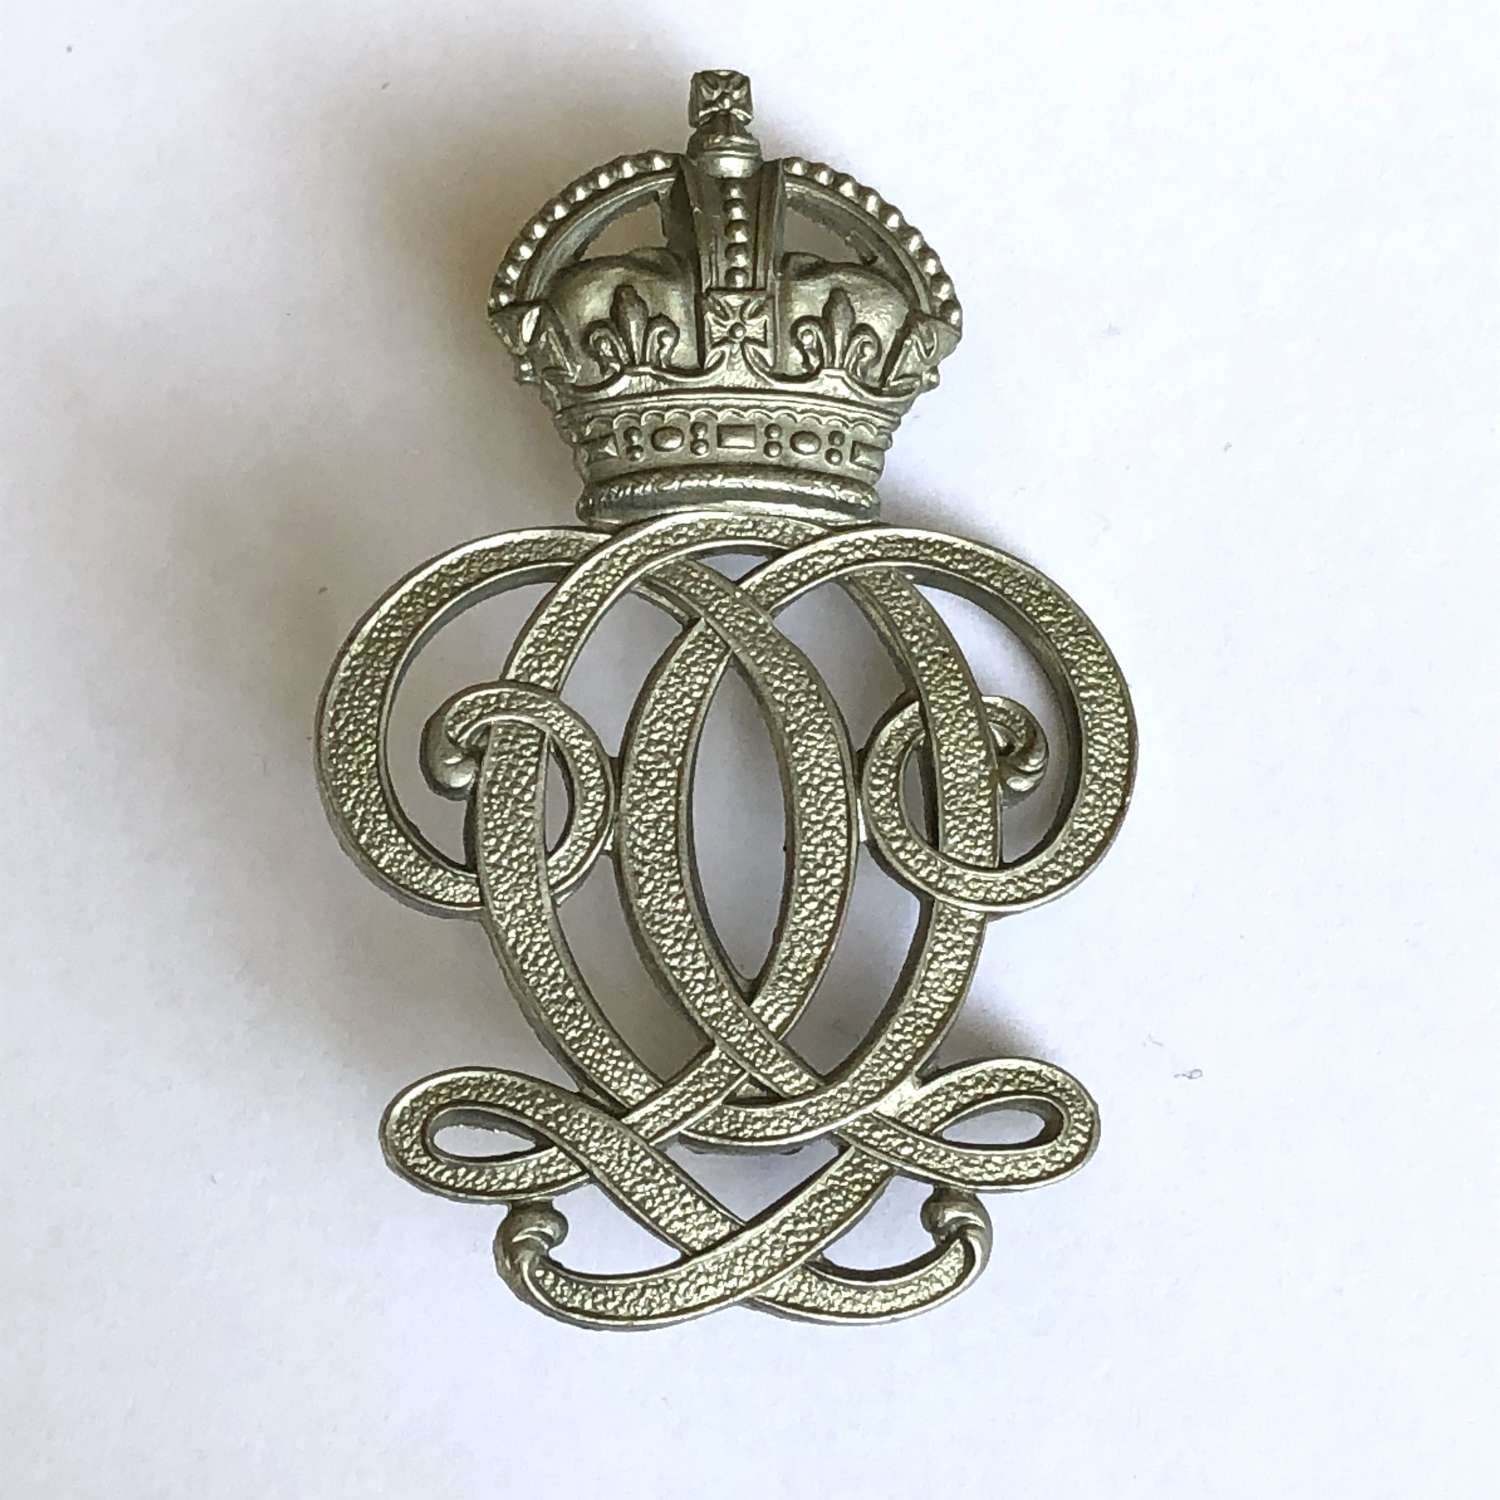 7th Queen’s Own Hussars NCO’s pre 1952 arm badge